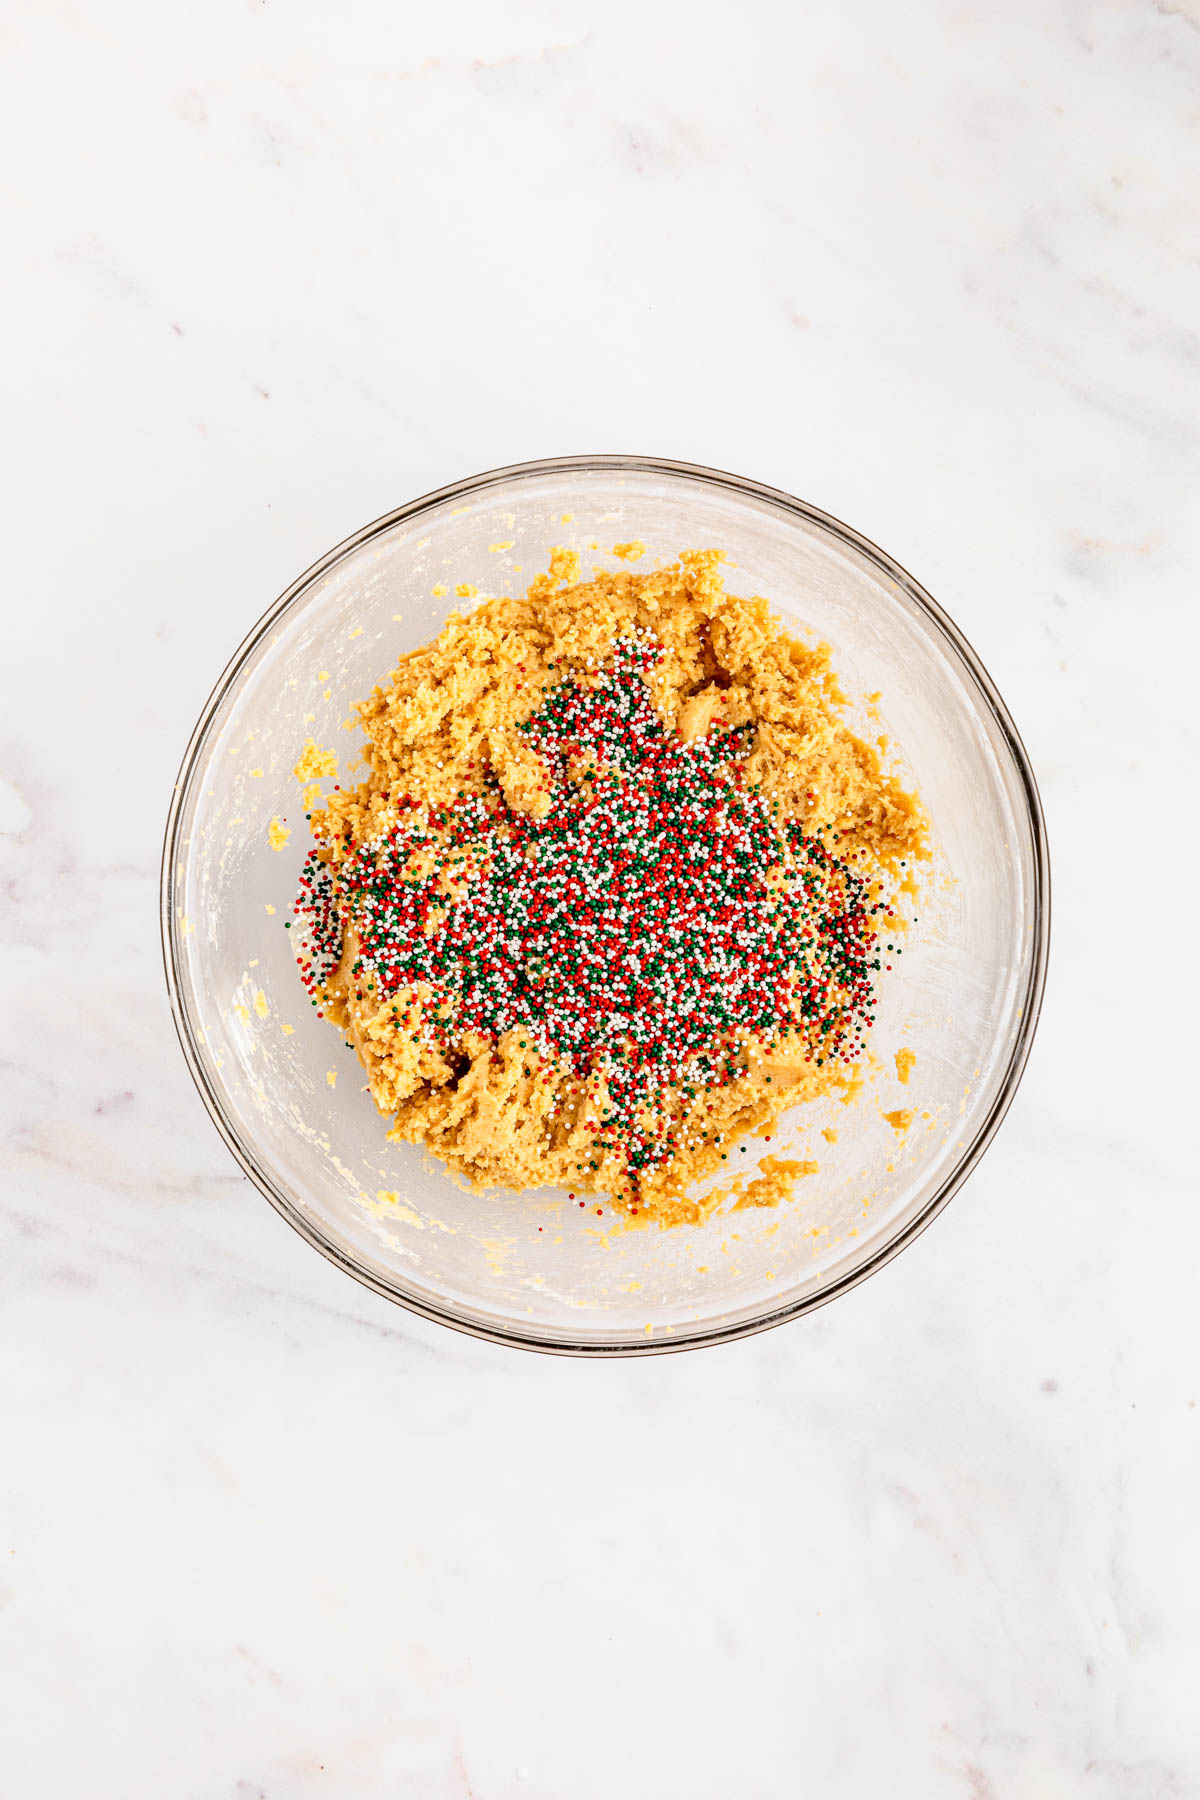 A bowl filled with a mixture of dough and sprinkles.